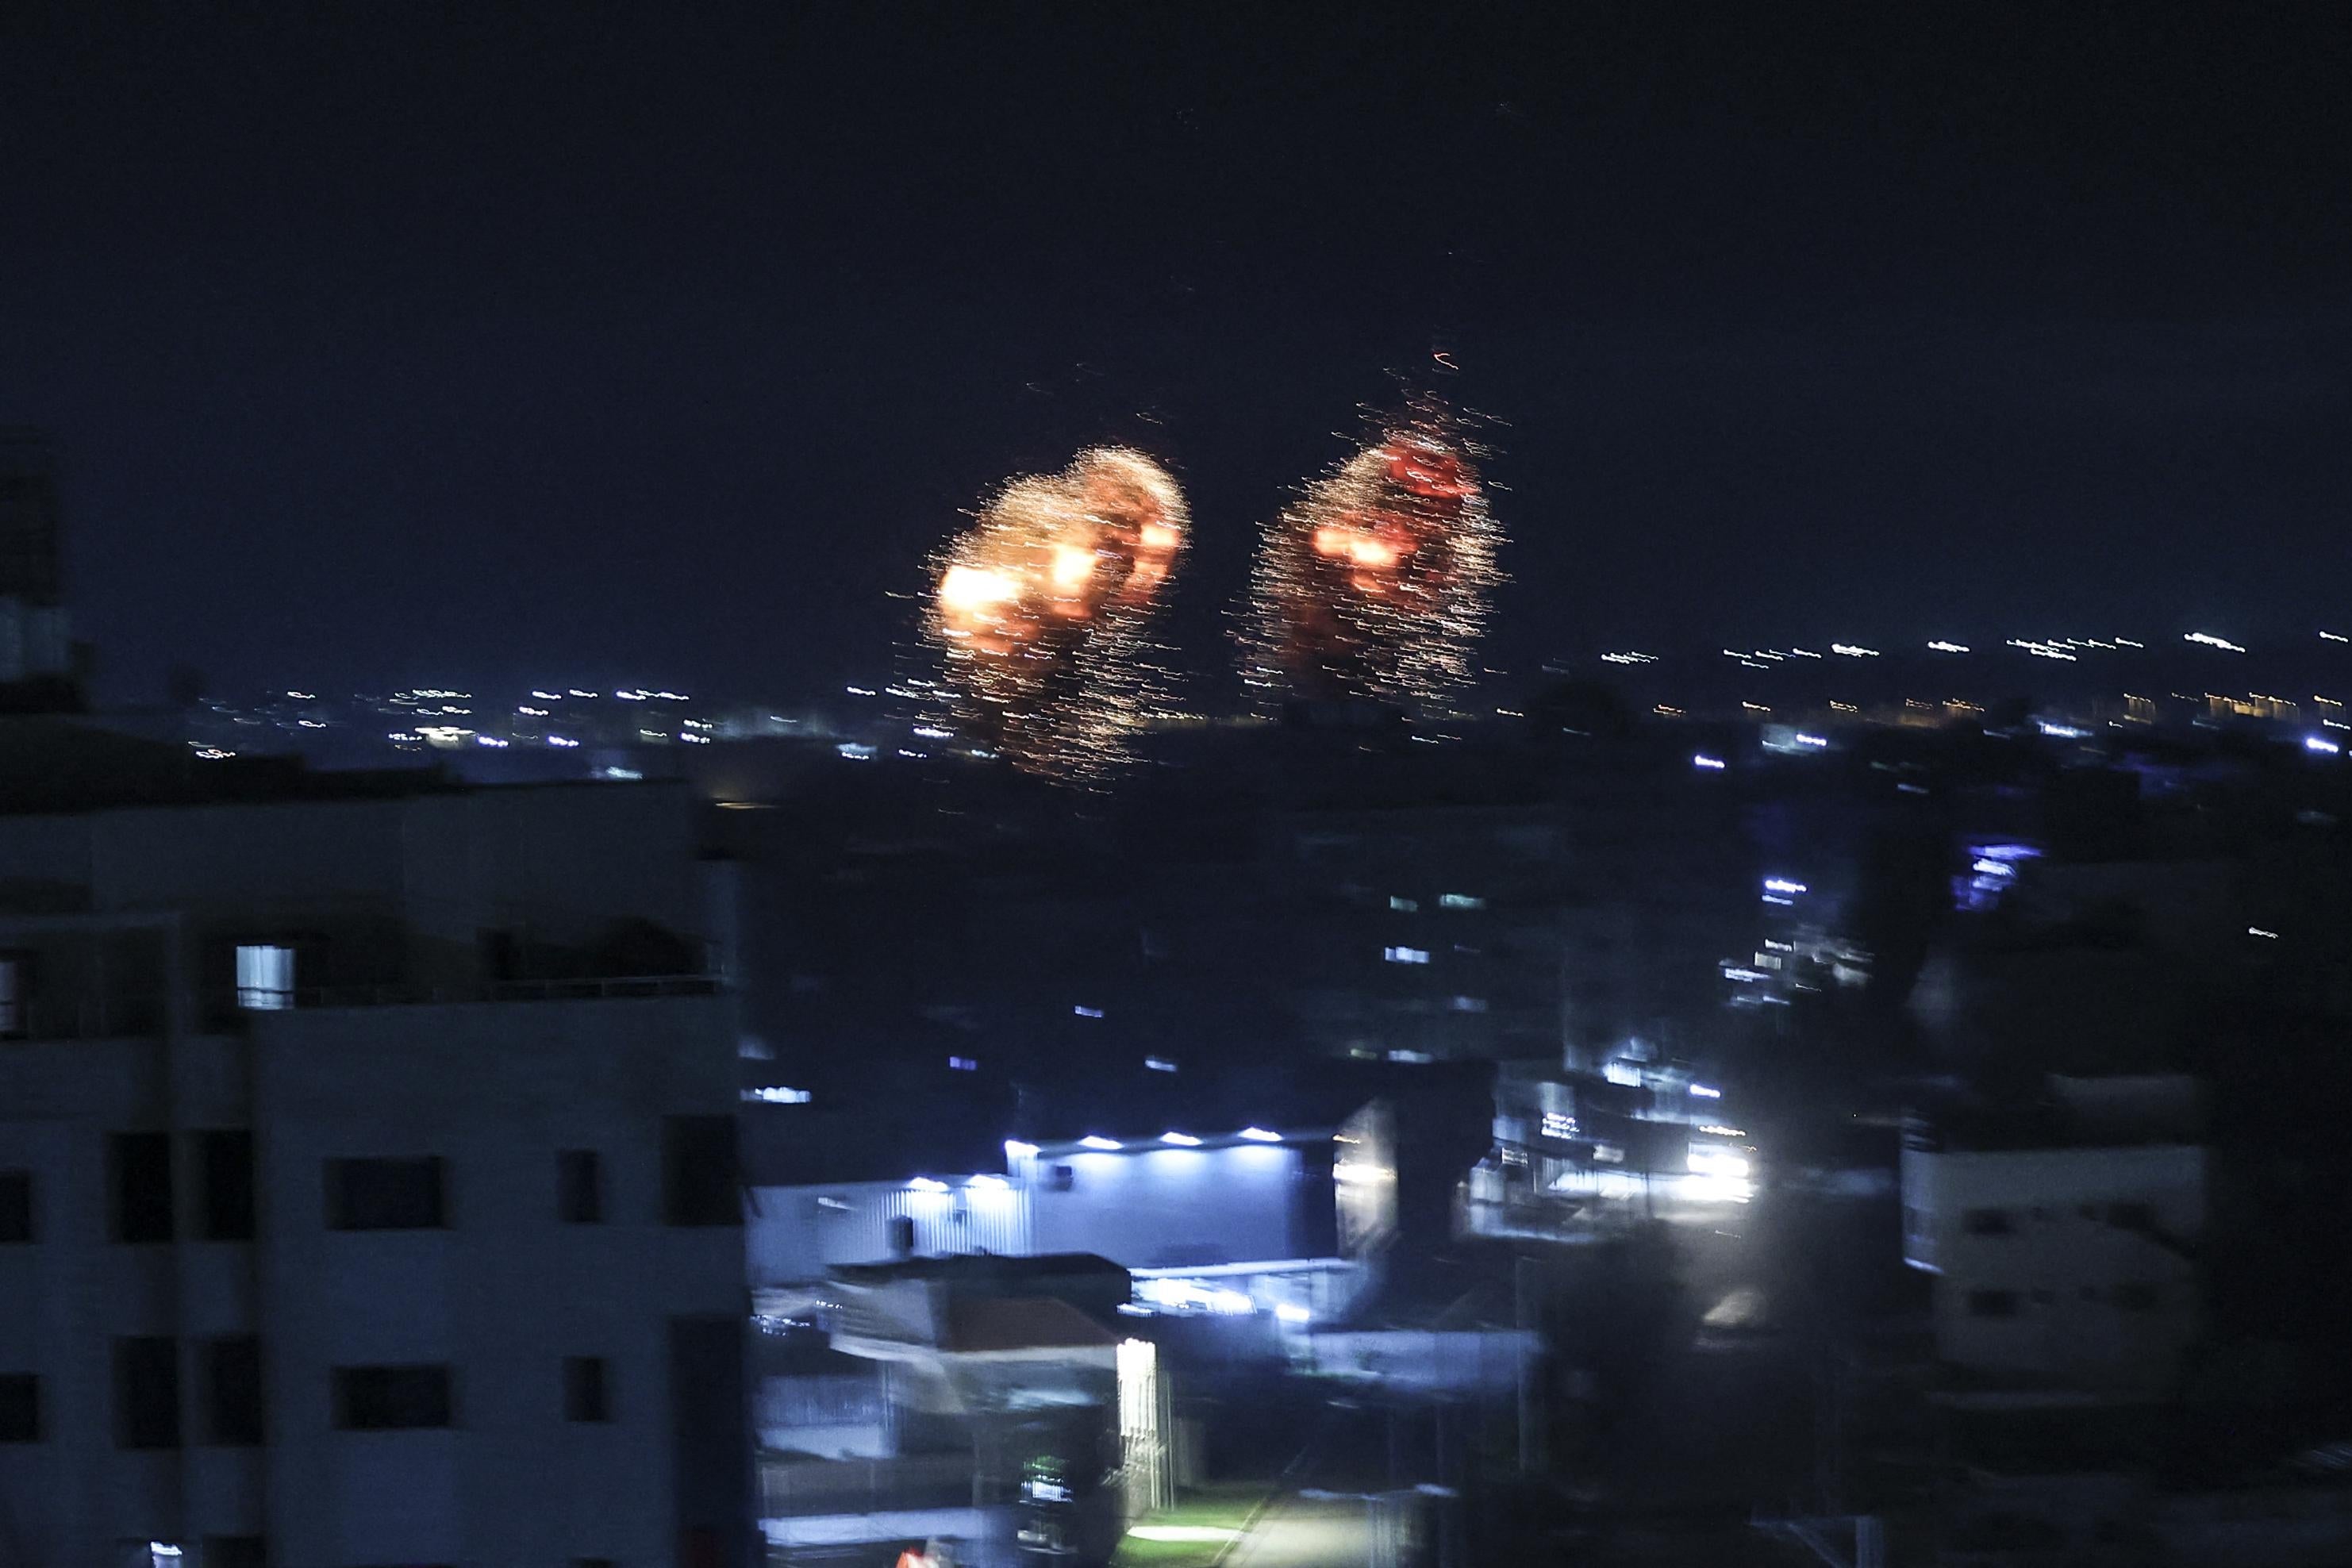 Two fiery explosions can be seen in the night sky on Gaza city skyline.